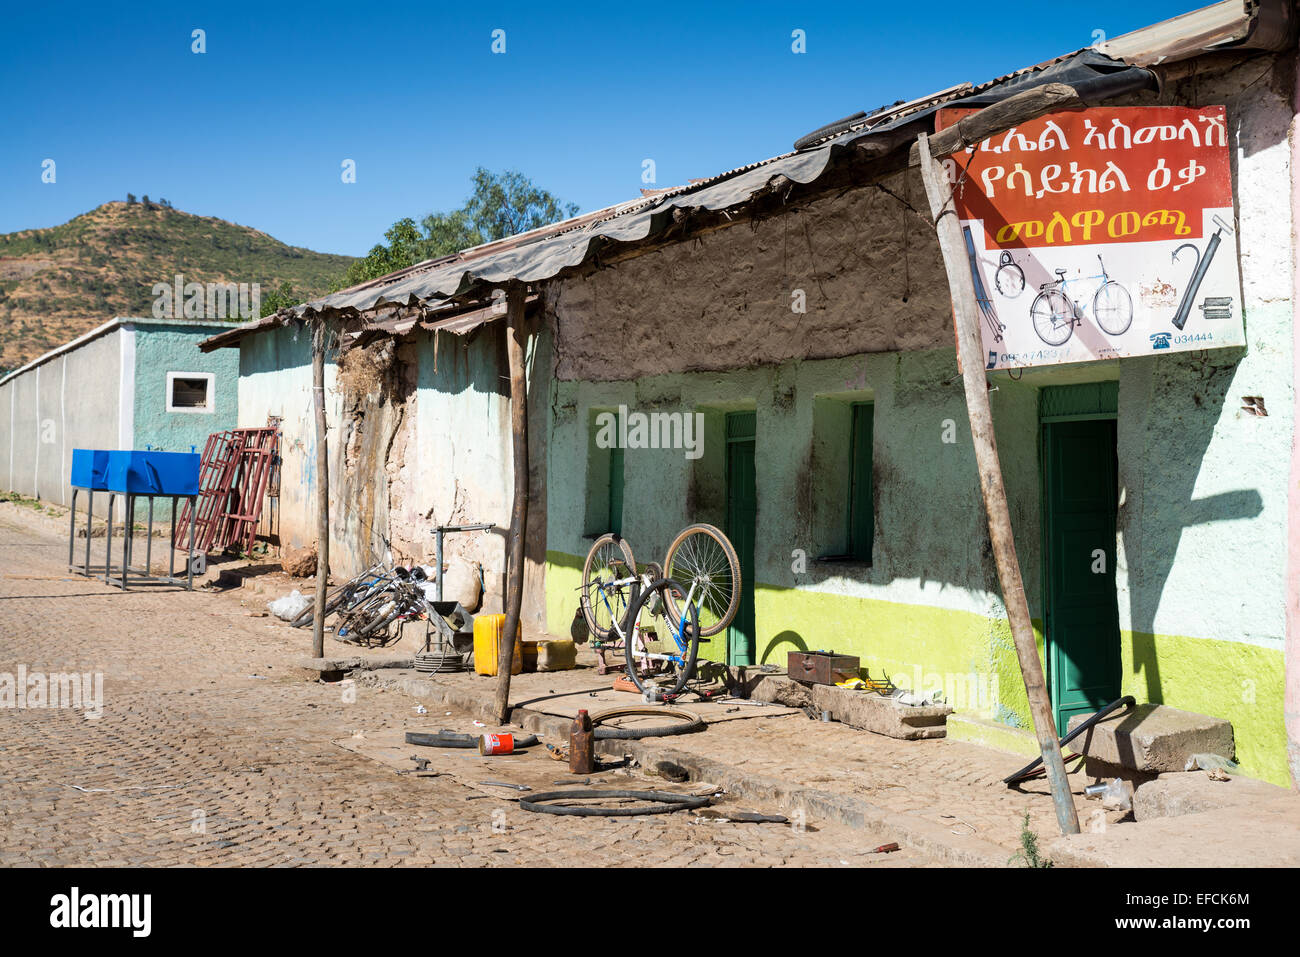 Streets of city of Shire, Tigray, Ethiopia, Africa Stock Photo